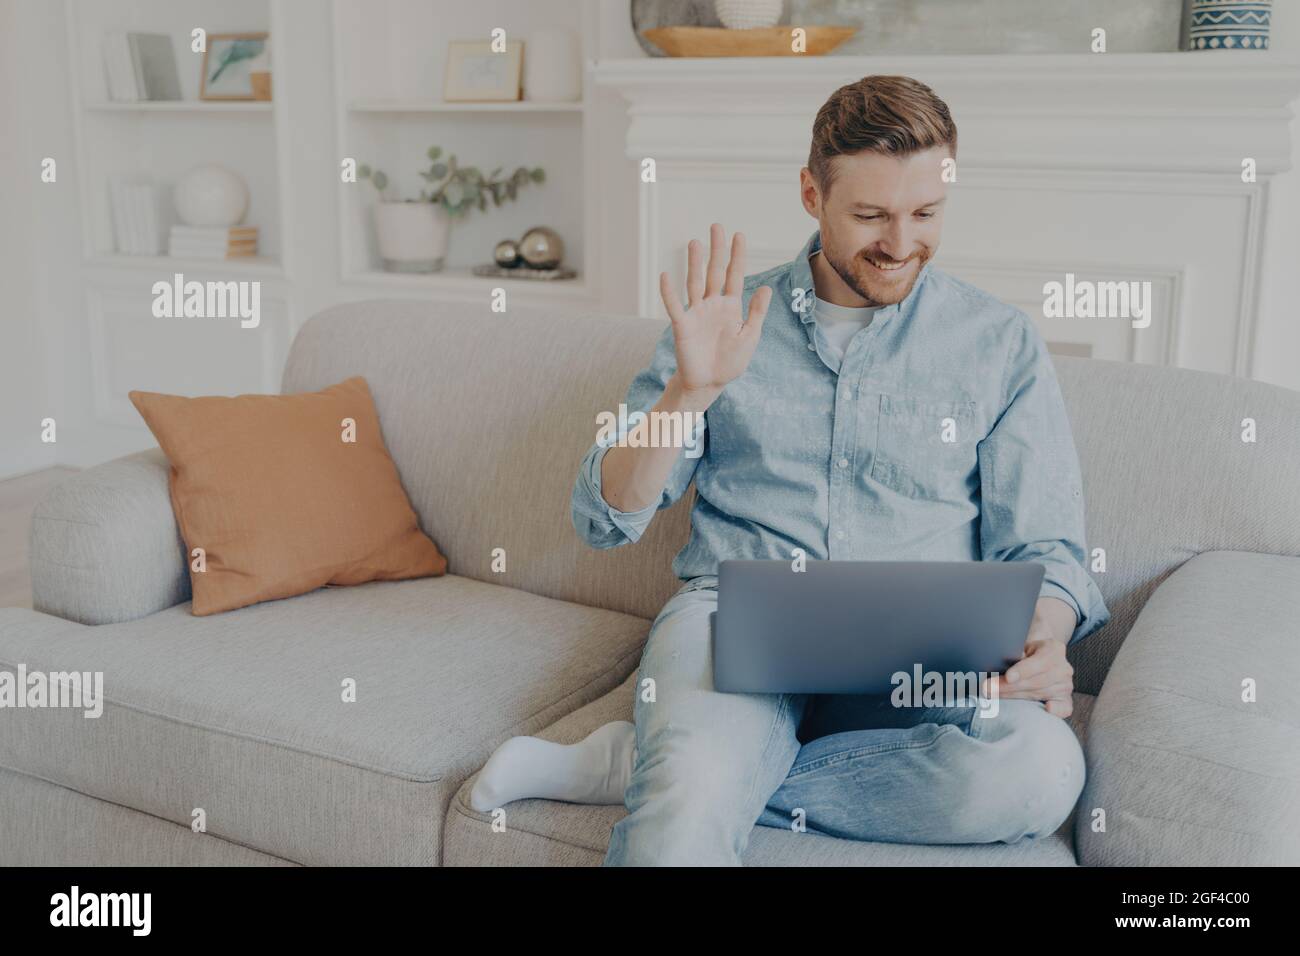 Young man speaking with family using notebook while sitting on couch Stock Photo